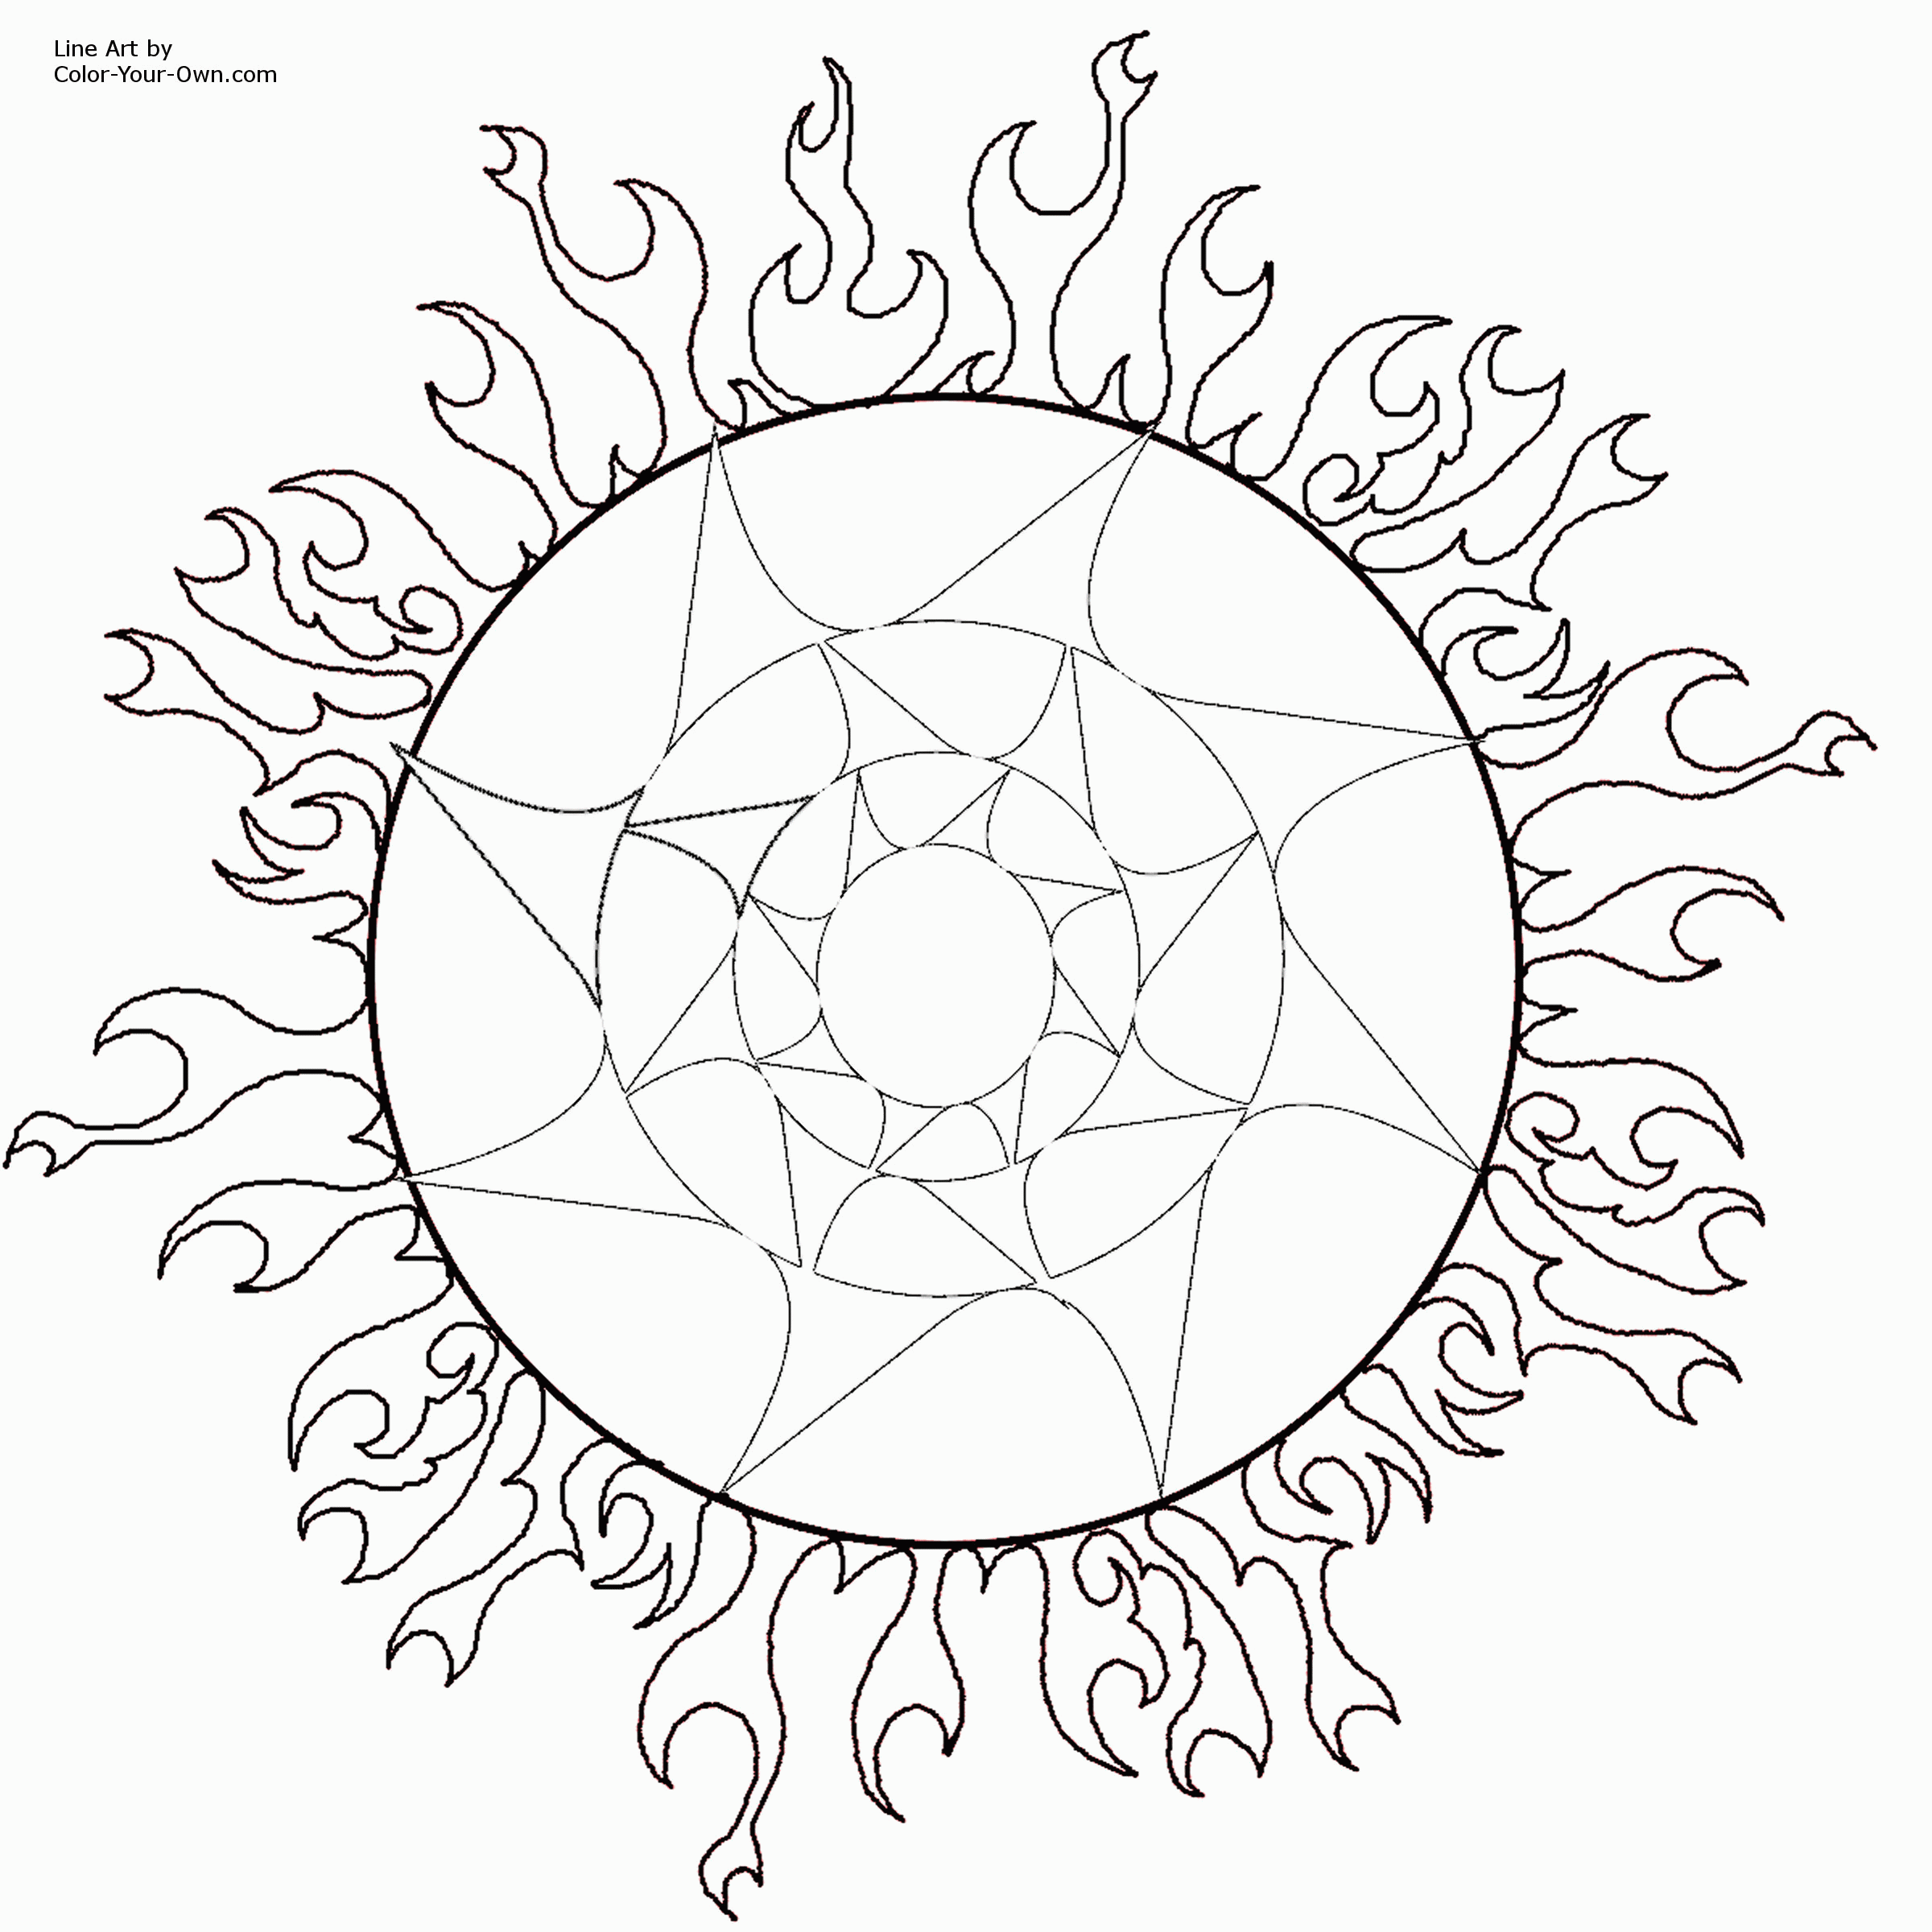 Printable Wiccan Coloring Pages - High Quality Coloring Pages